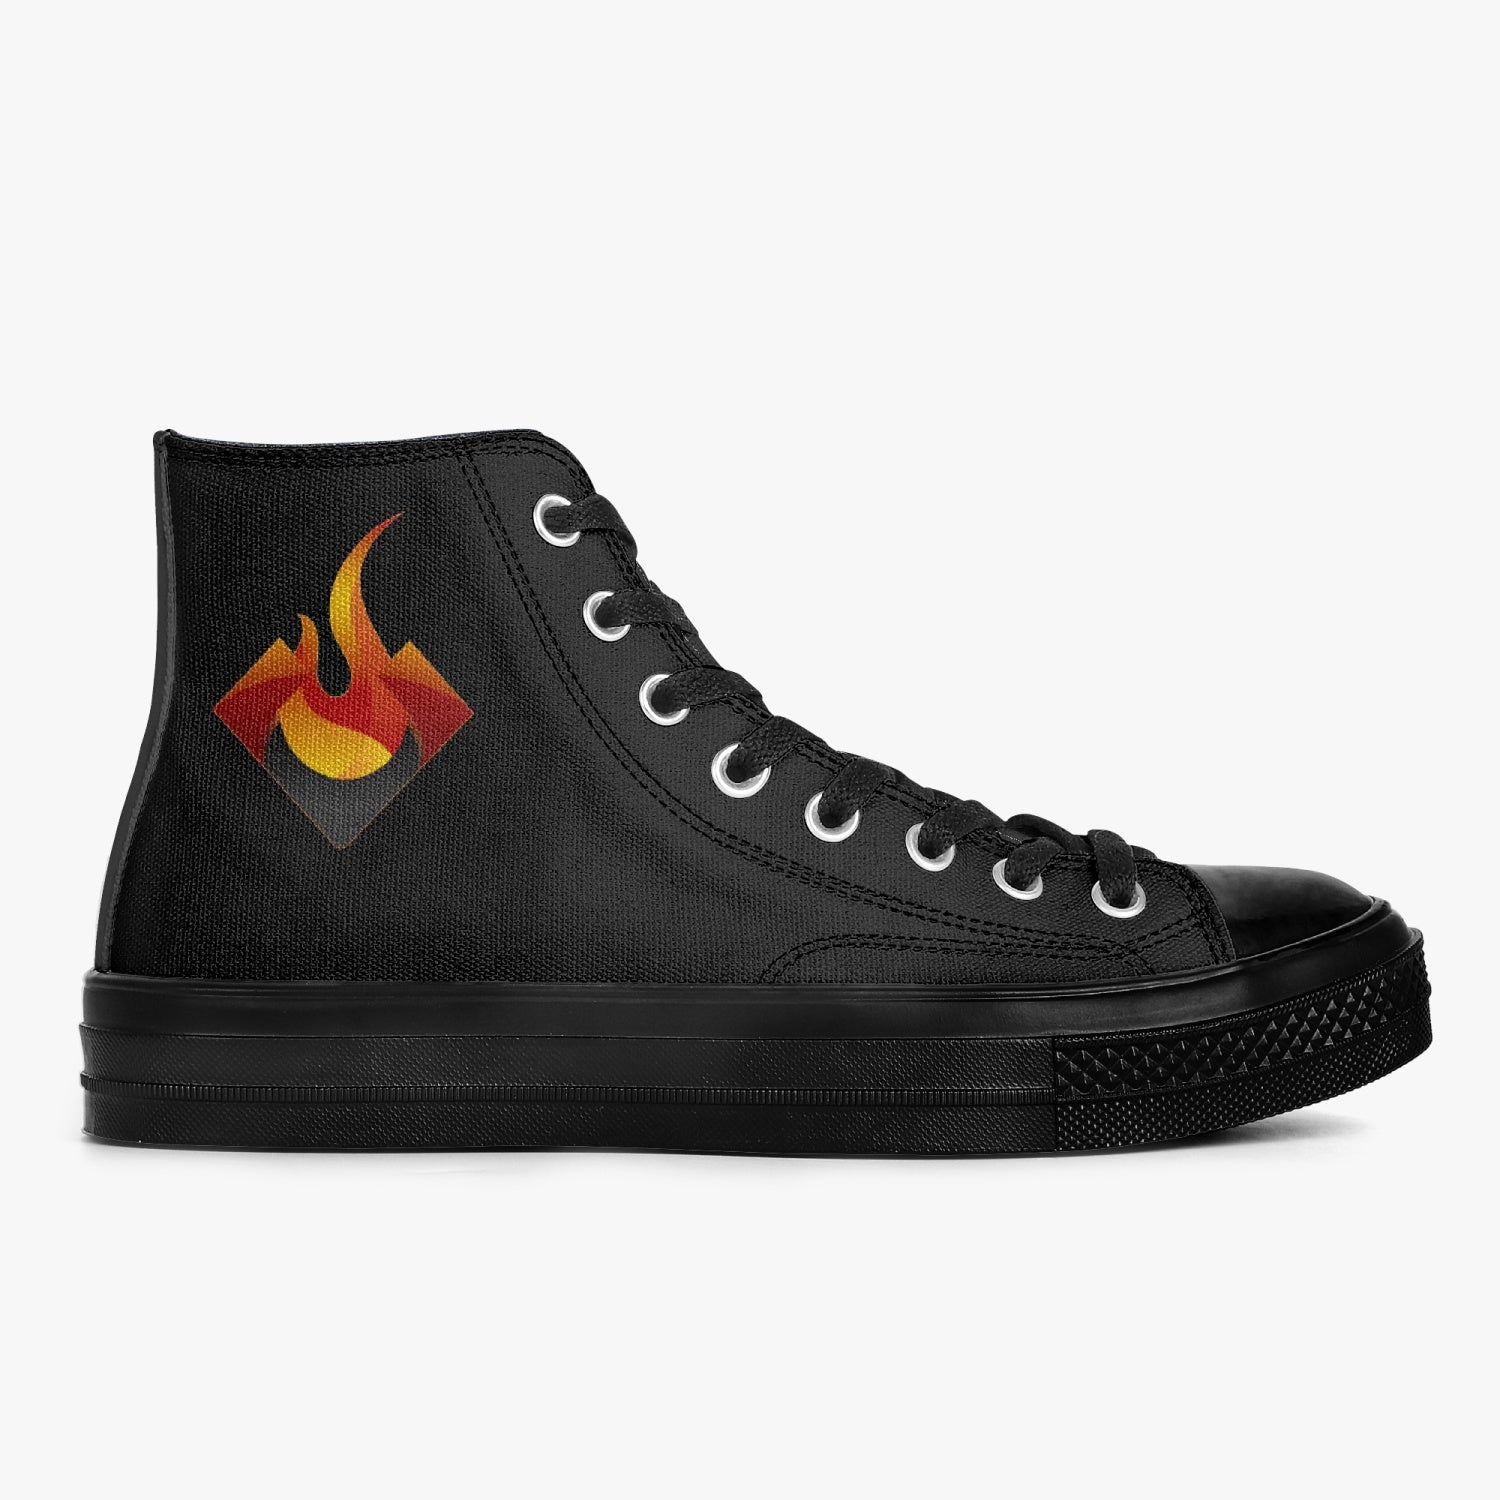 VALIANT High-Top Canvas Shoes